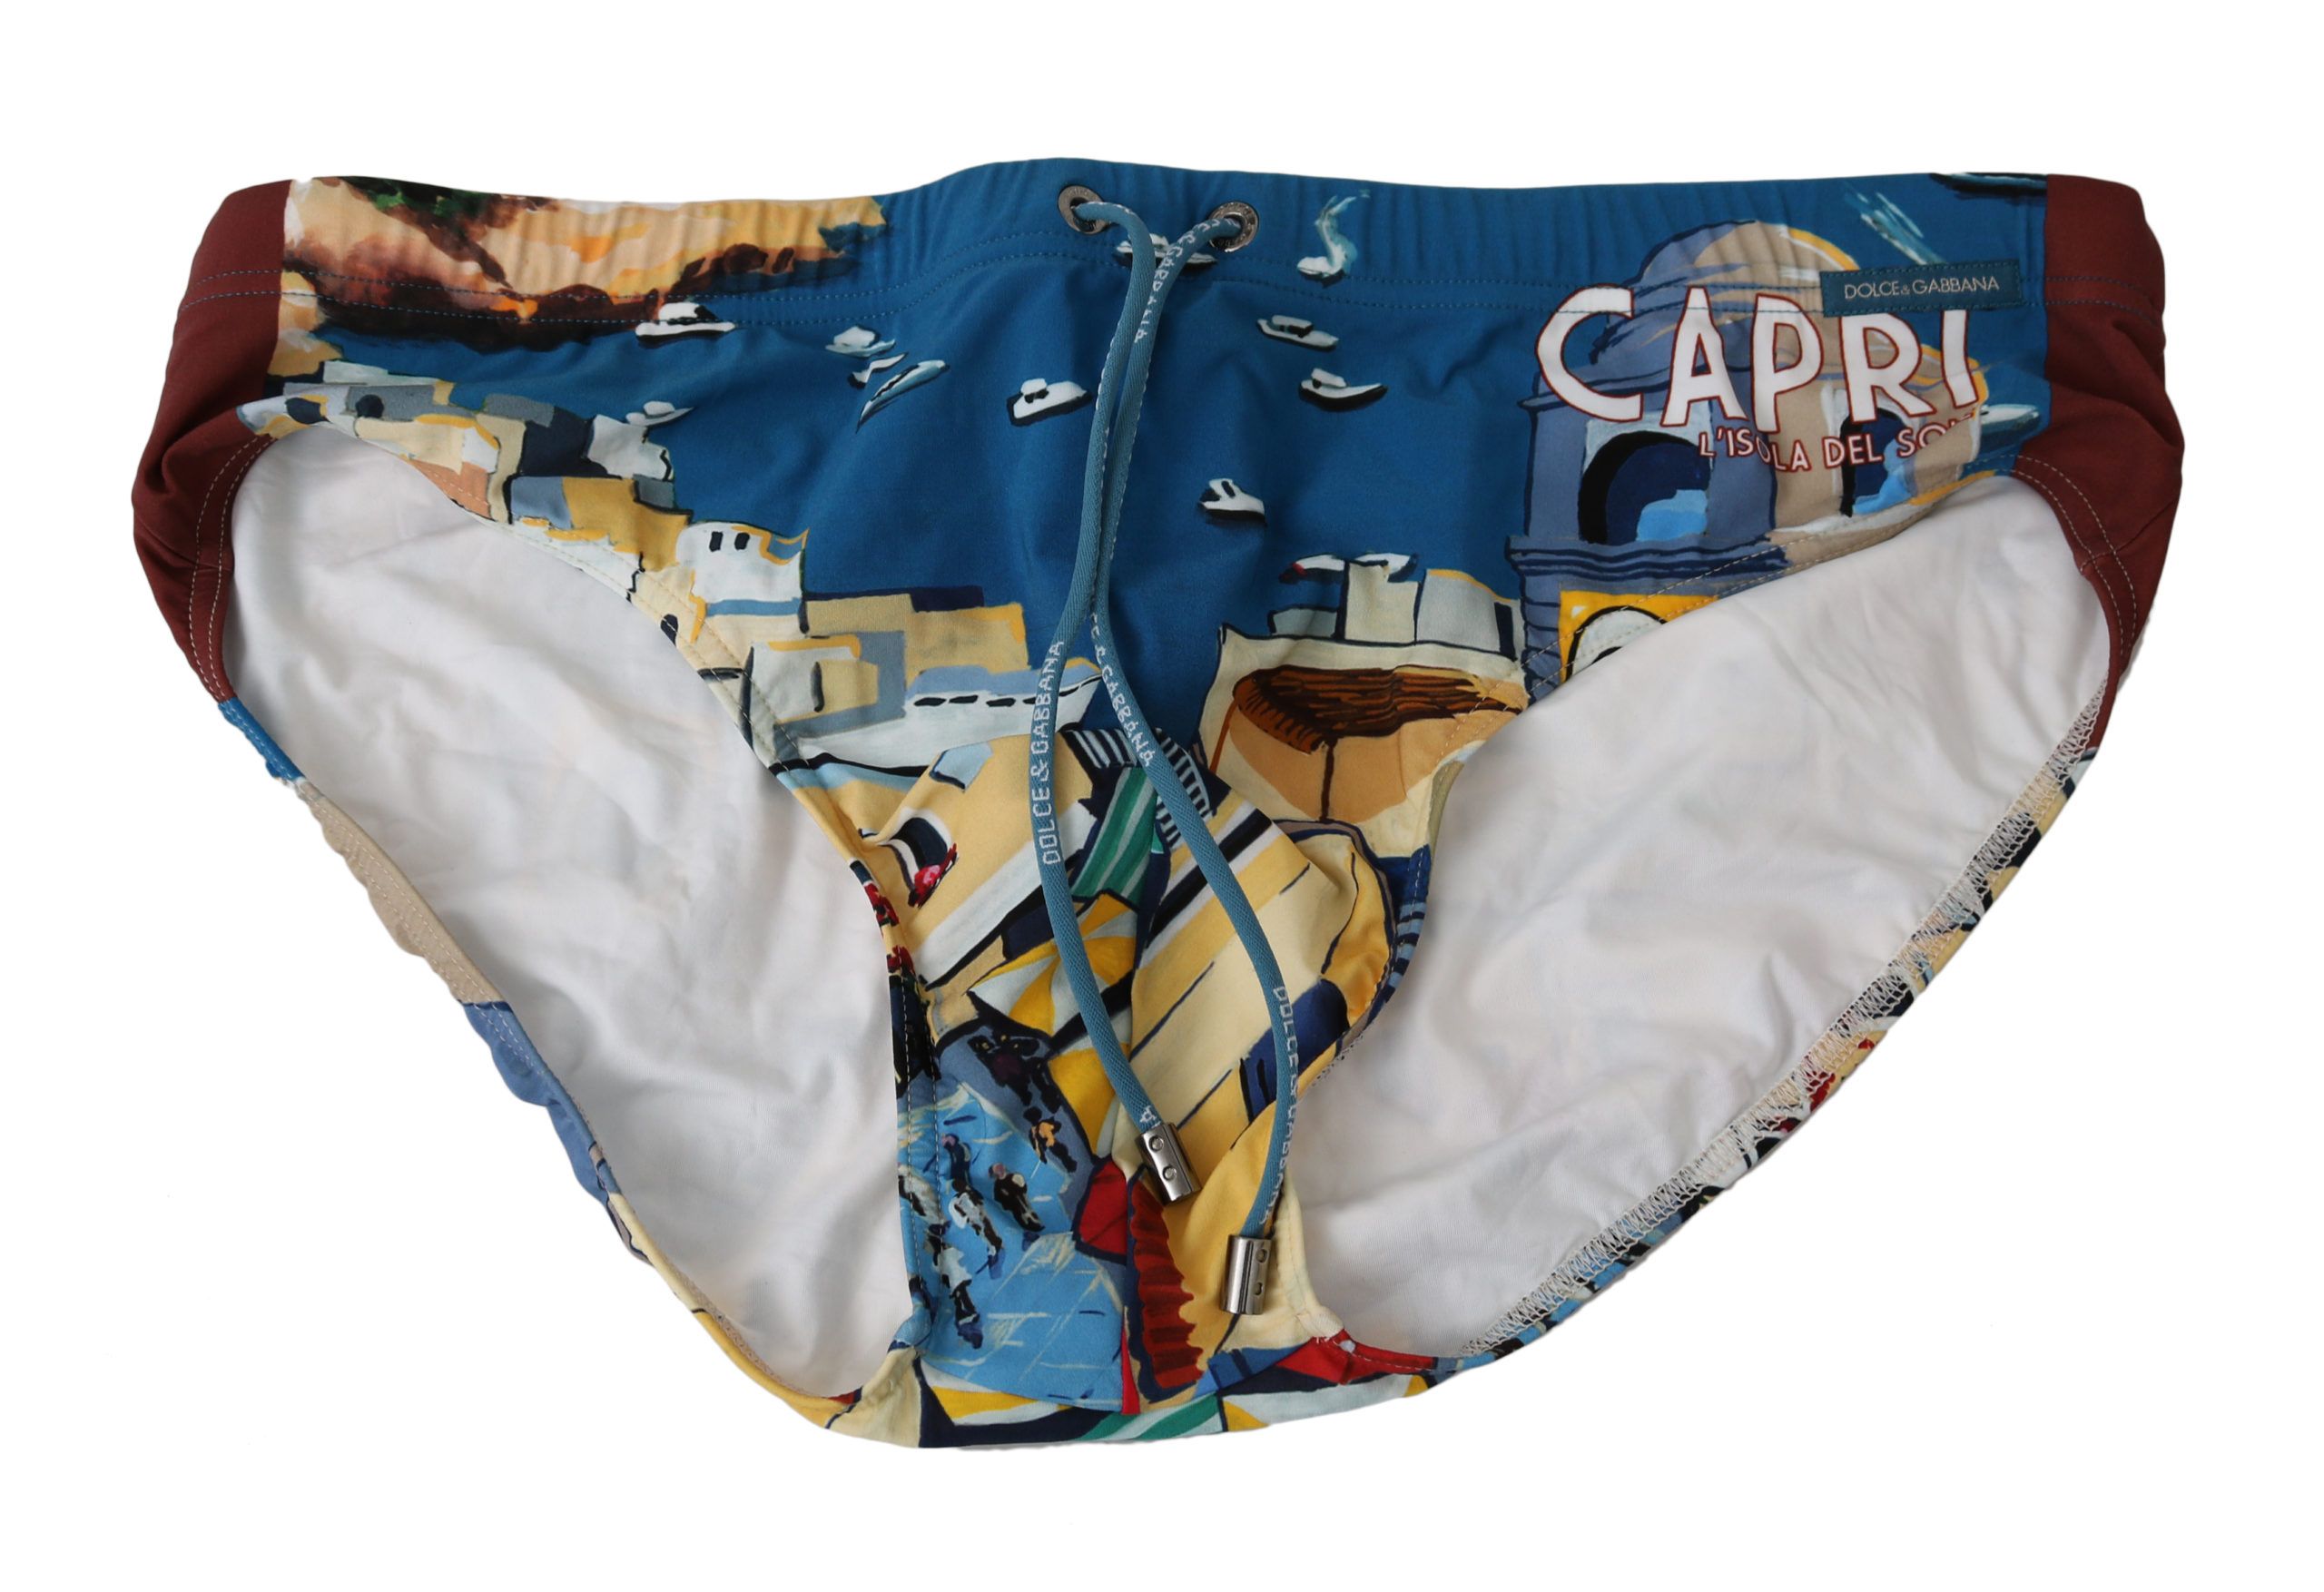 DOLCE&GABBANA. 
Absolutely stunning, 100% Authentic, brand new with tags Dolce&Gabbana Beachwear. . 
Modell: Swim briefs beachwear 
Color: Blue with CAPRI print 
Material: . 75% Nylon 25% Elastane
Waist strap. 
Logo details. 
Great fitting and comfort.